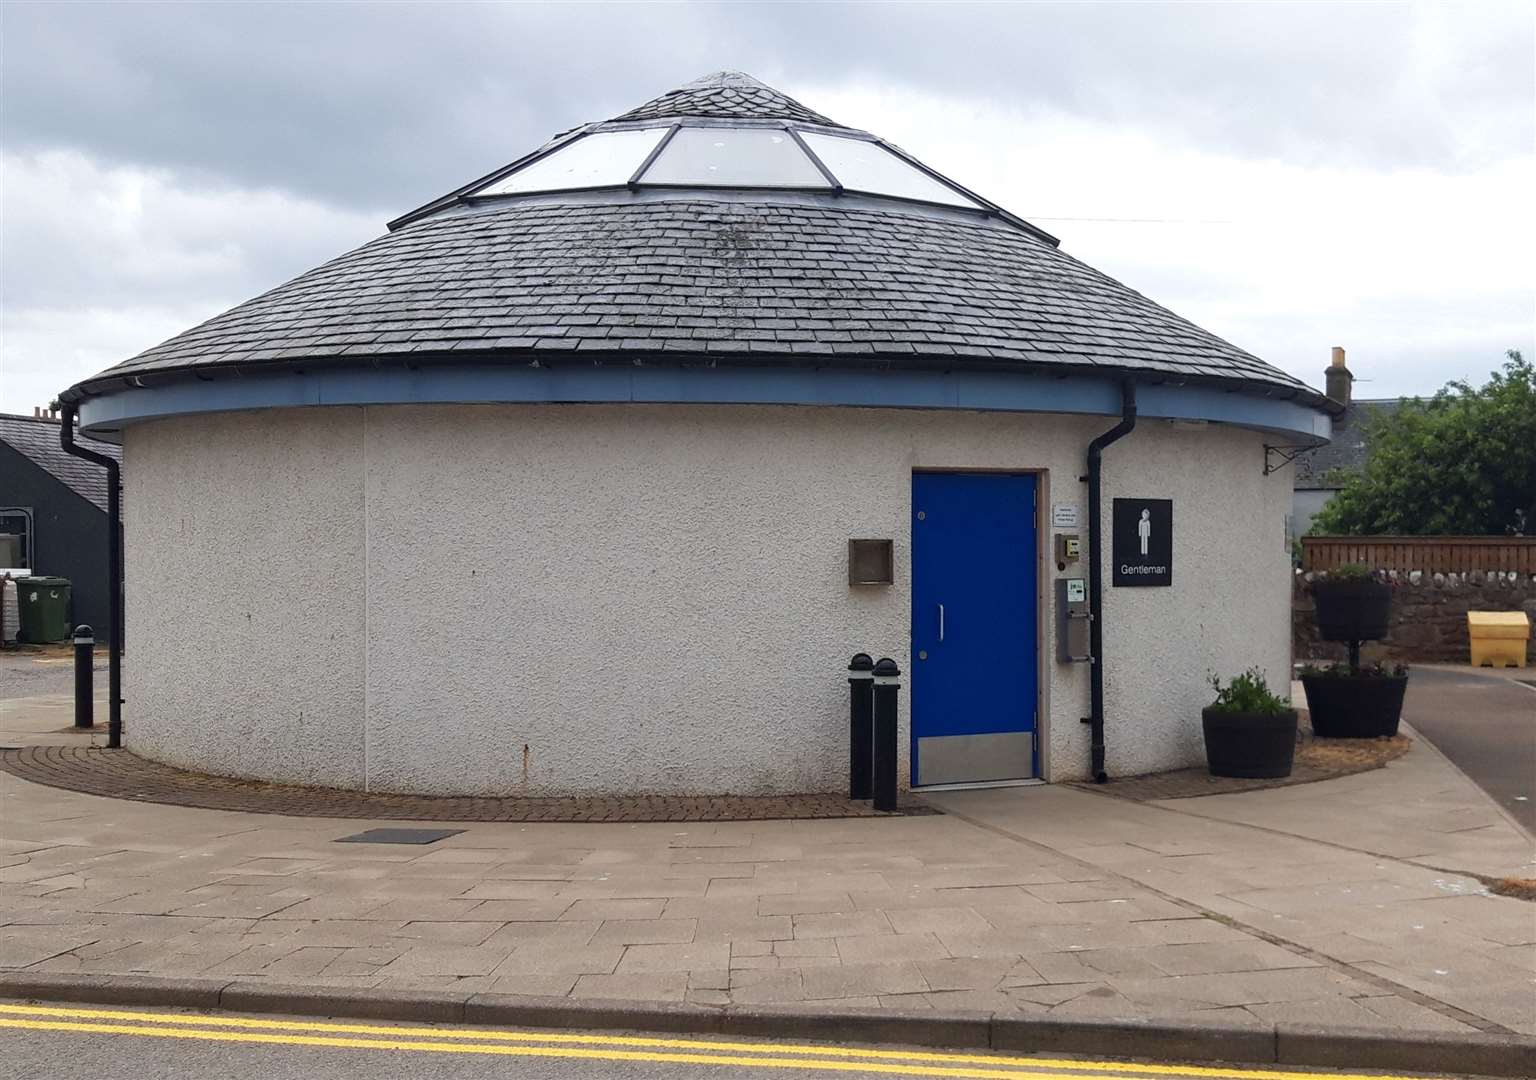 The public toilets at Golspie reopened this week after a six-months closure.